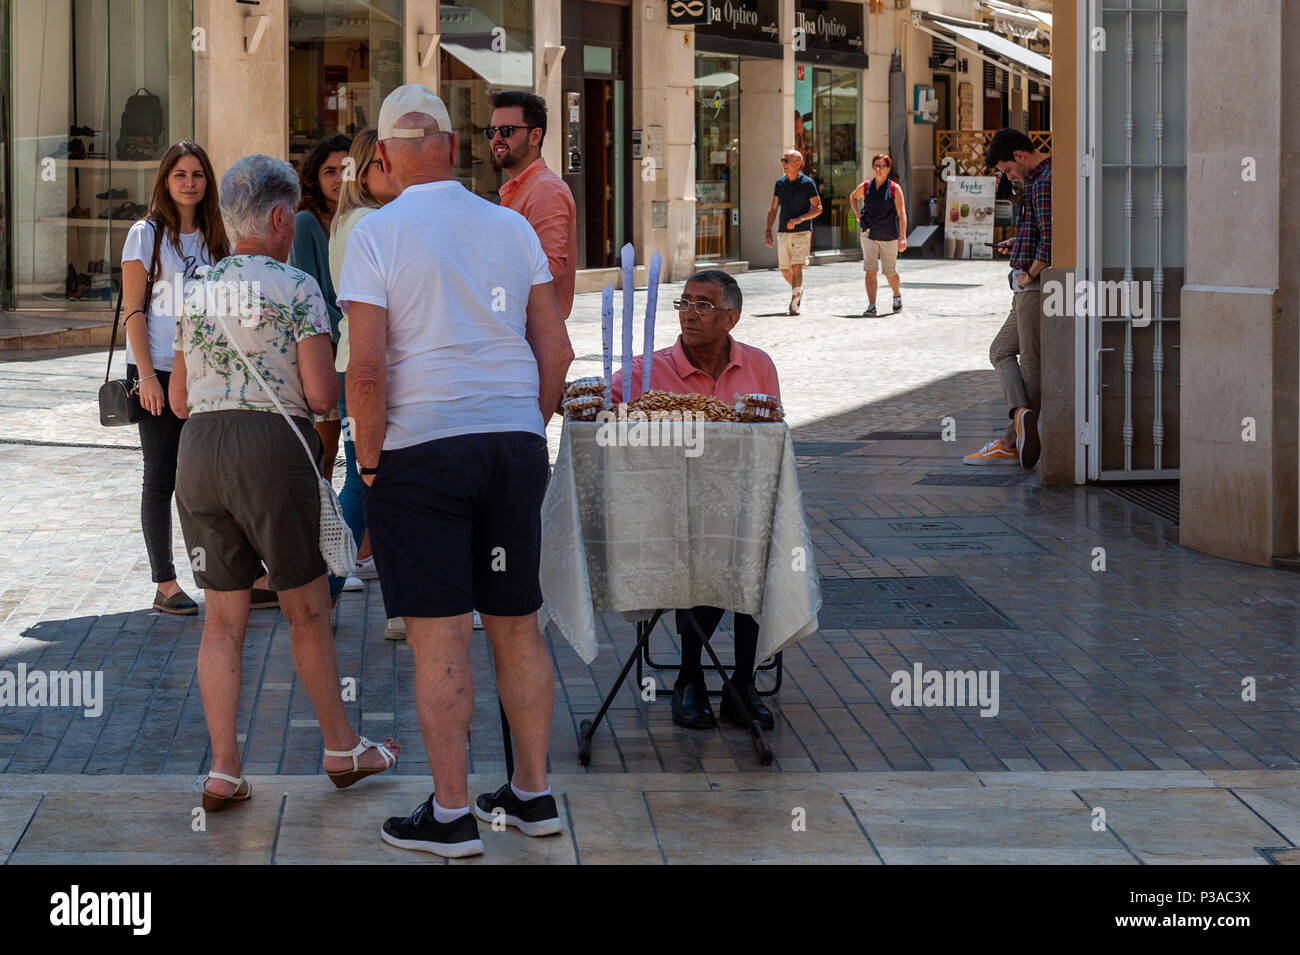 Tourists/customers stop at a stall selling peanuts and talk to the peanut vendor in Malaga, Spain. Stock Photo